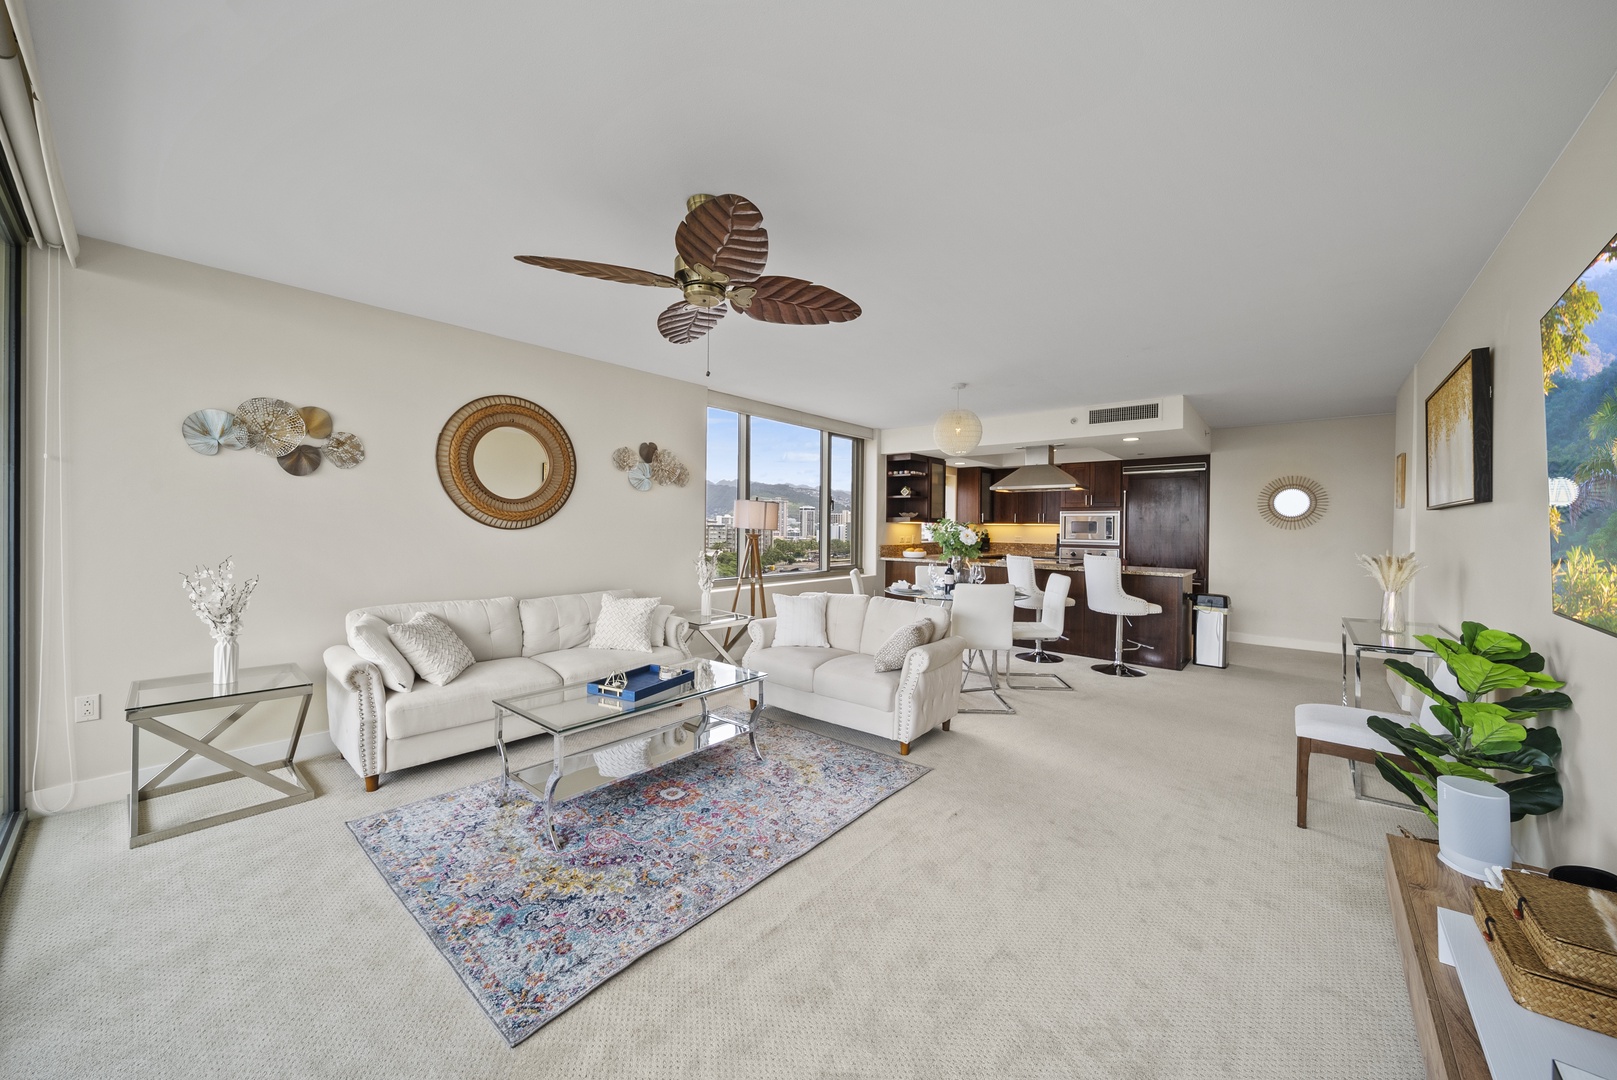 Honolulu Vacation Rentals, Watermark Waikiki Unit 901 - The spaciously designed living area has plush sofas and large windows and sliders for seamless indoor-outdoor living.